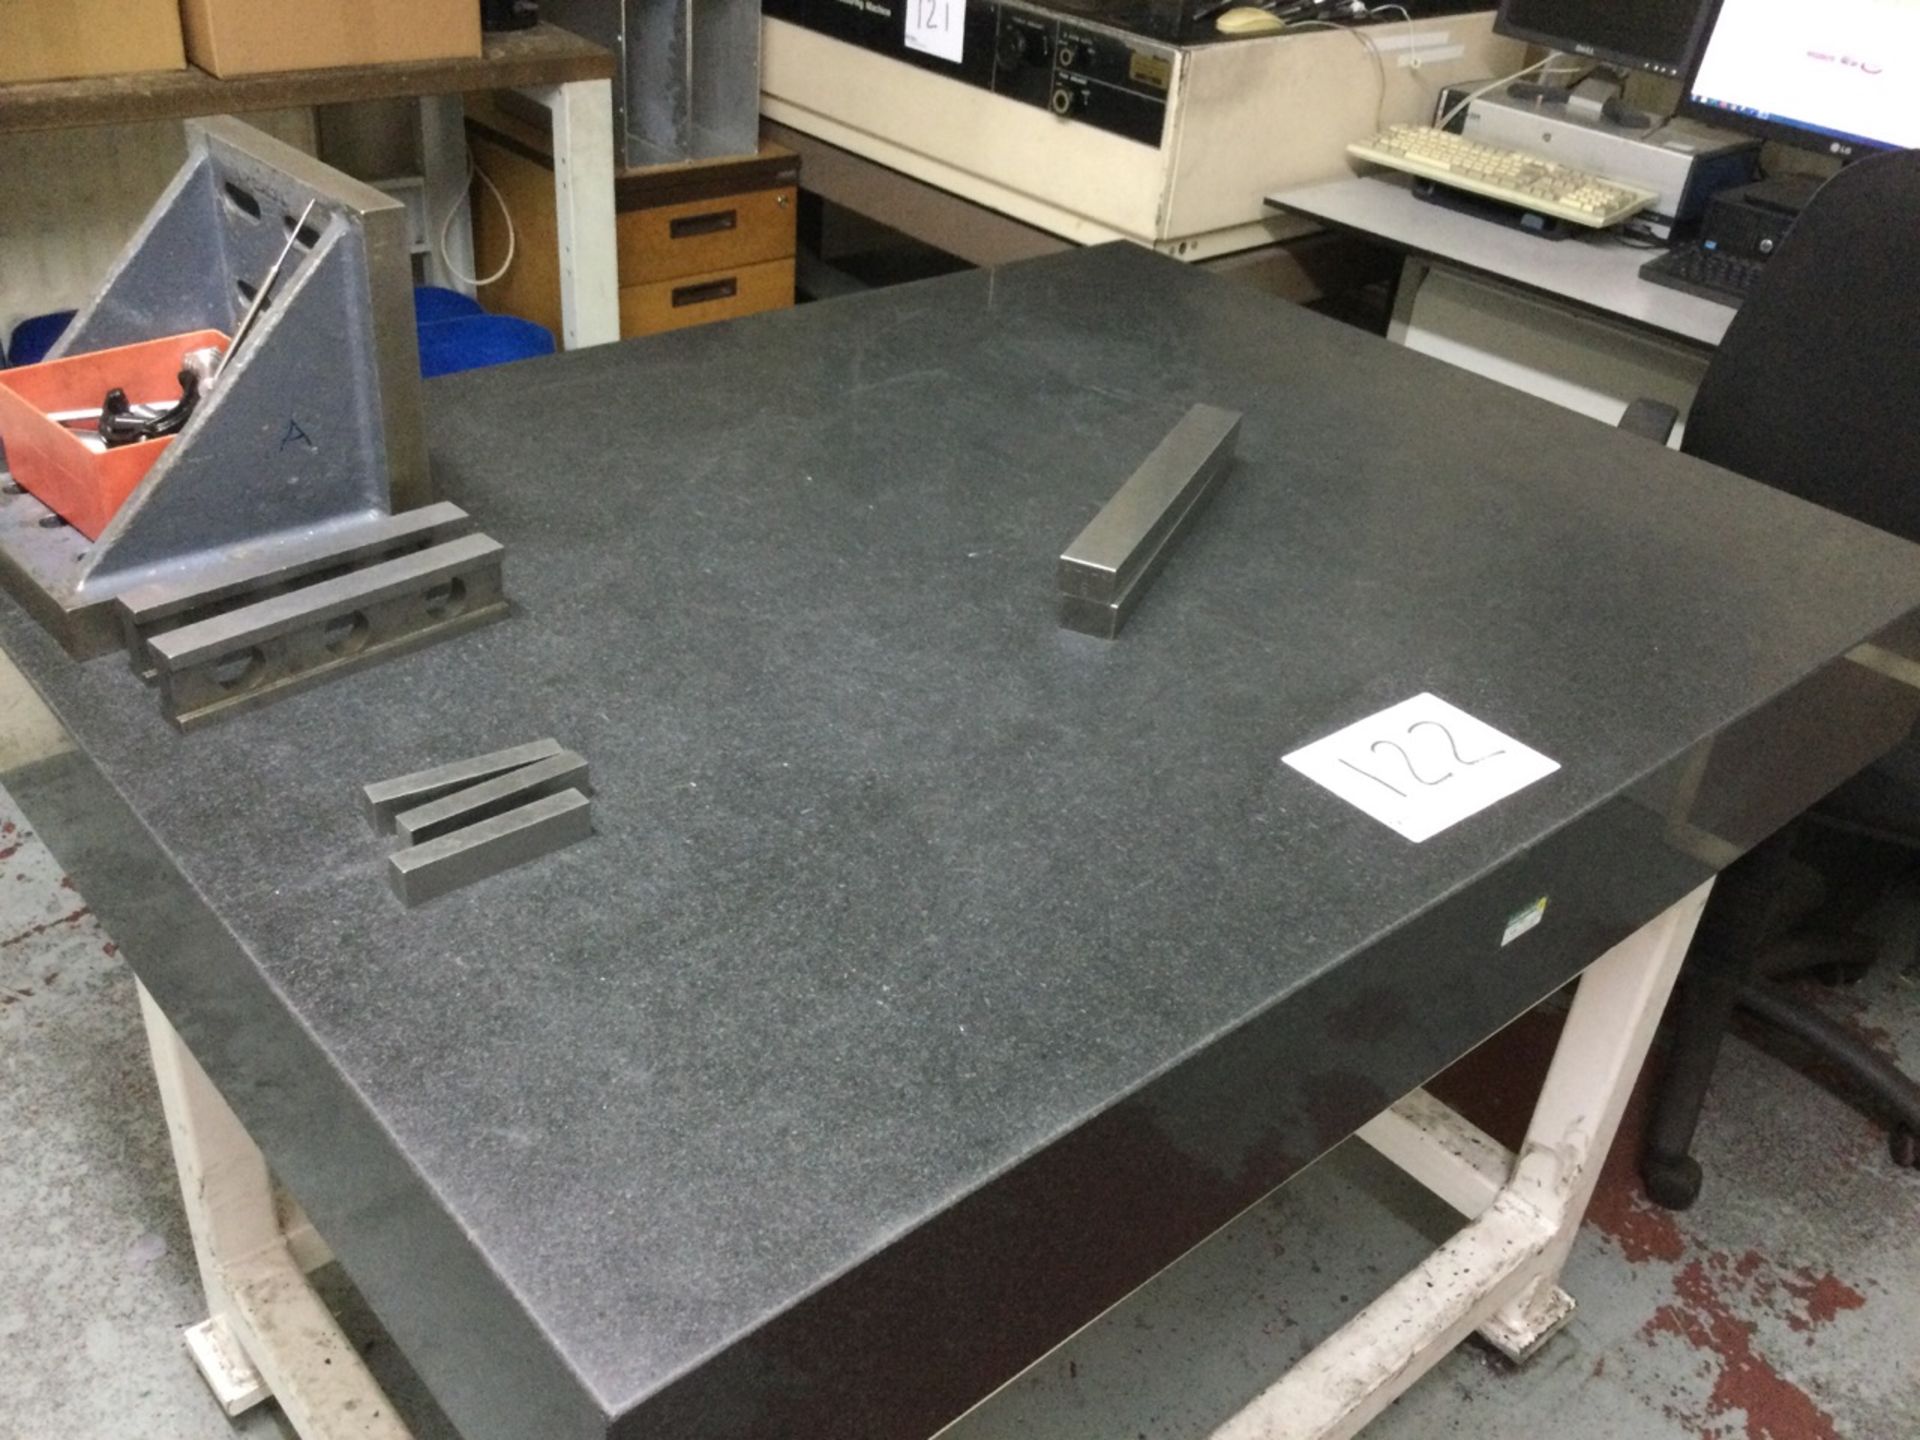 1, Granite table approx. 120 x 90 x 15cm, on a fab